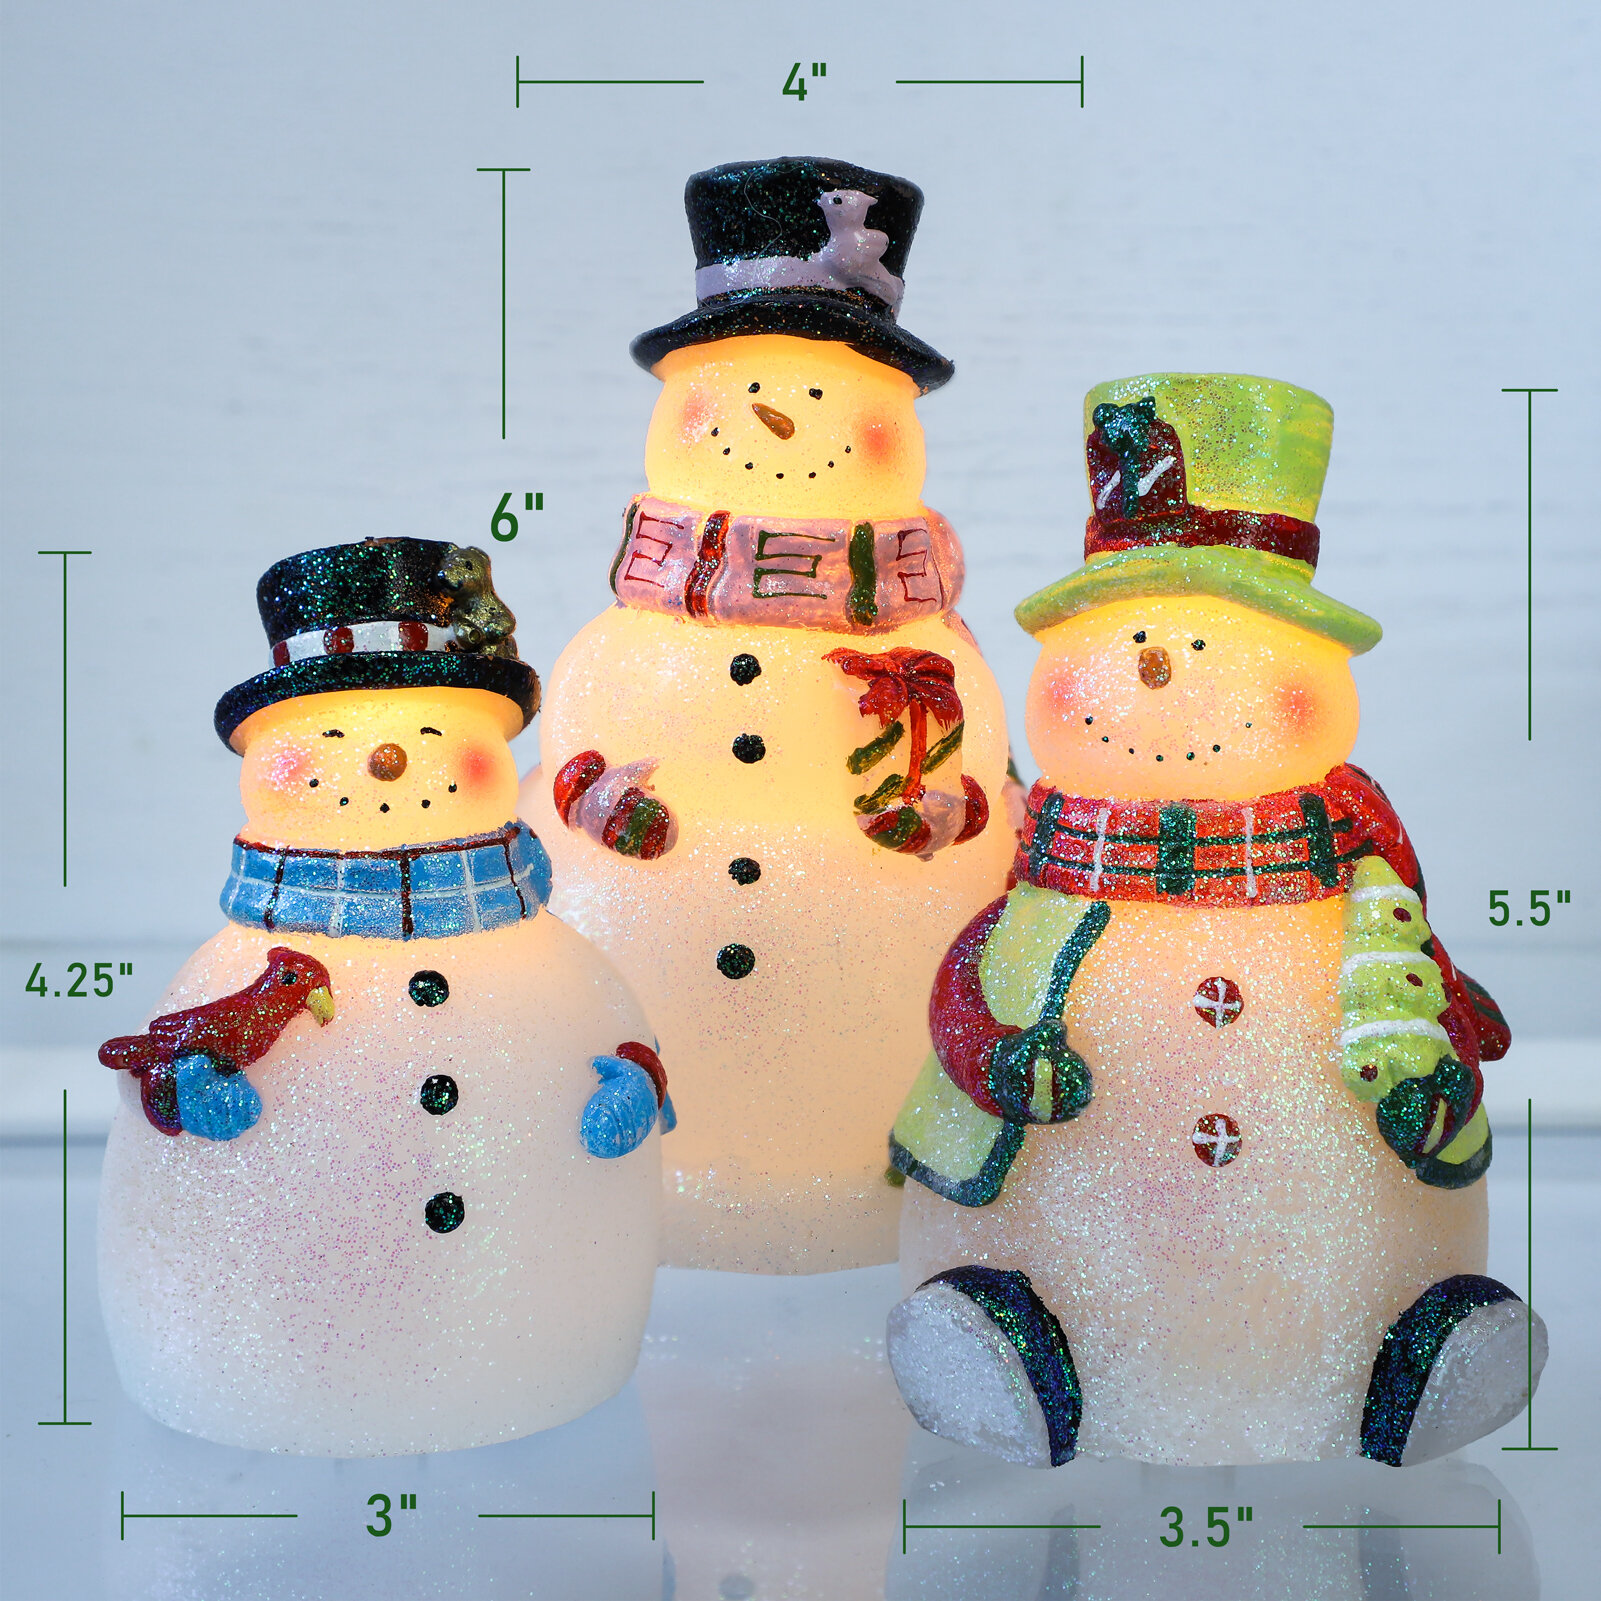 Details about   ORDER™ HOLIDAY 3-PC FLAMELESS LED WAX SNOWMAN SET BATTERY OPERATED WITH TIMER 